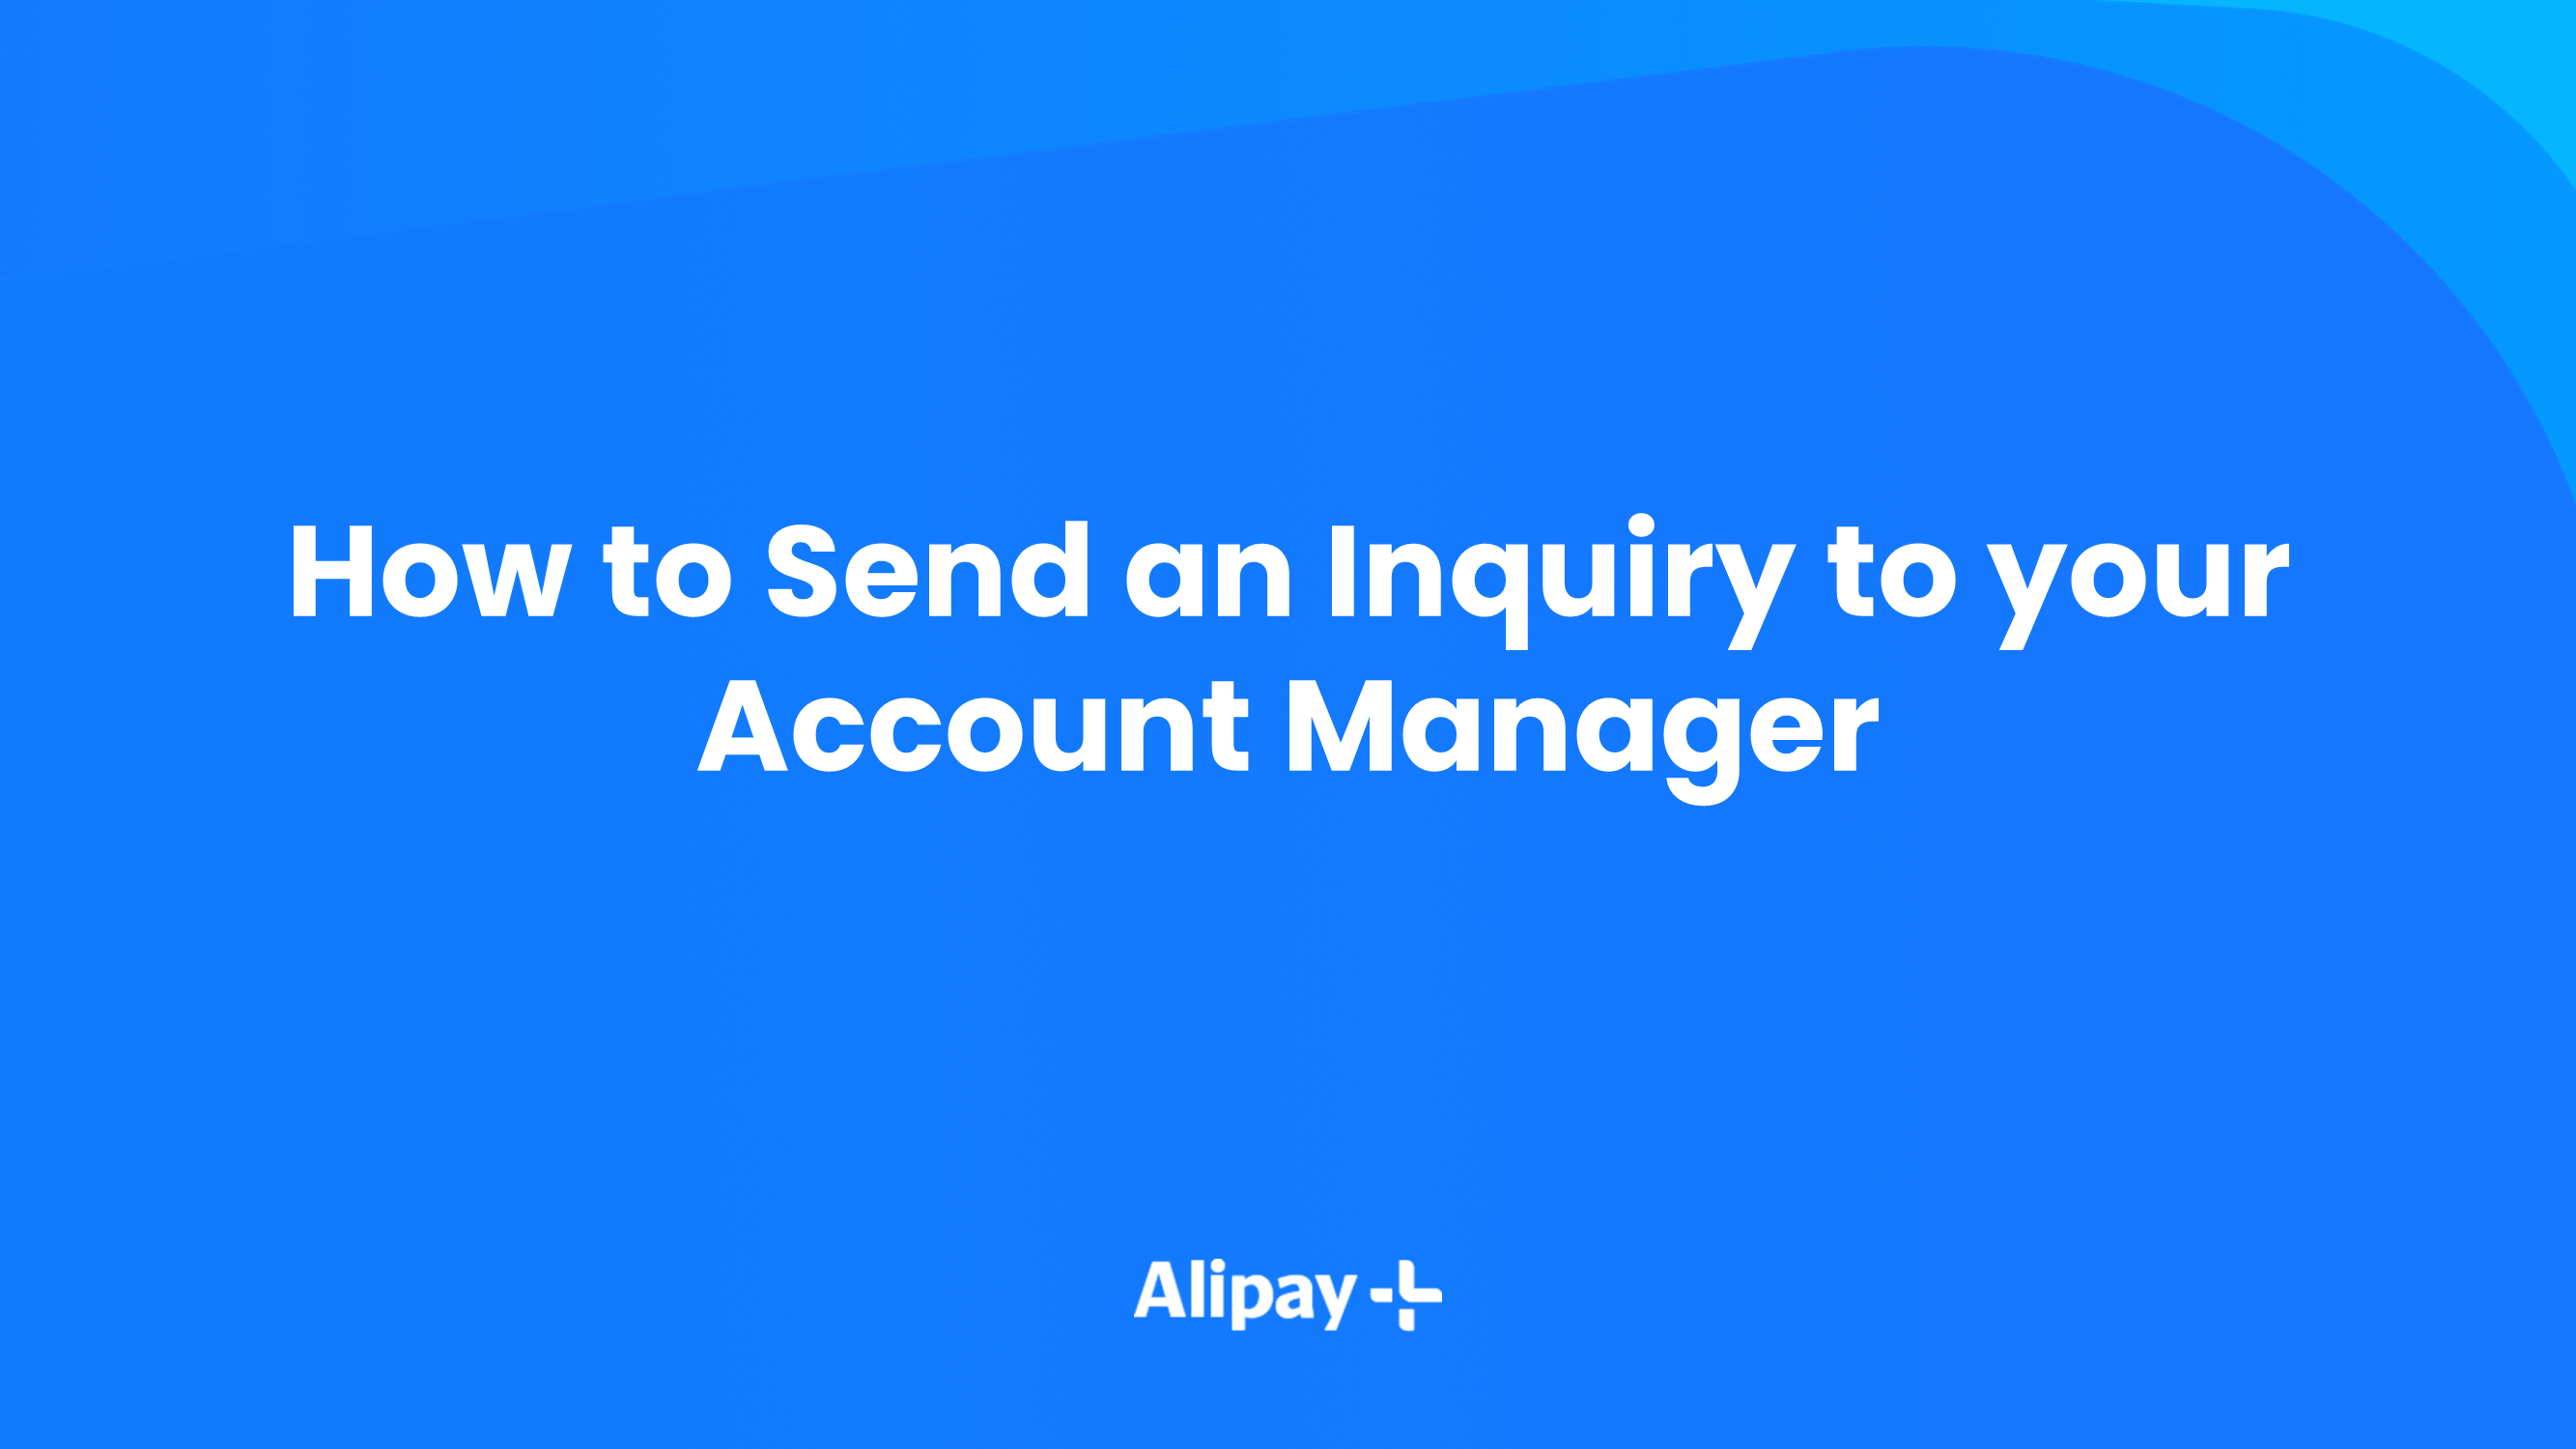 How to send an inquiry to your Account Manager